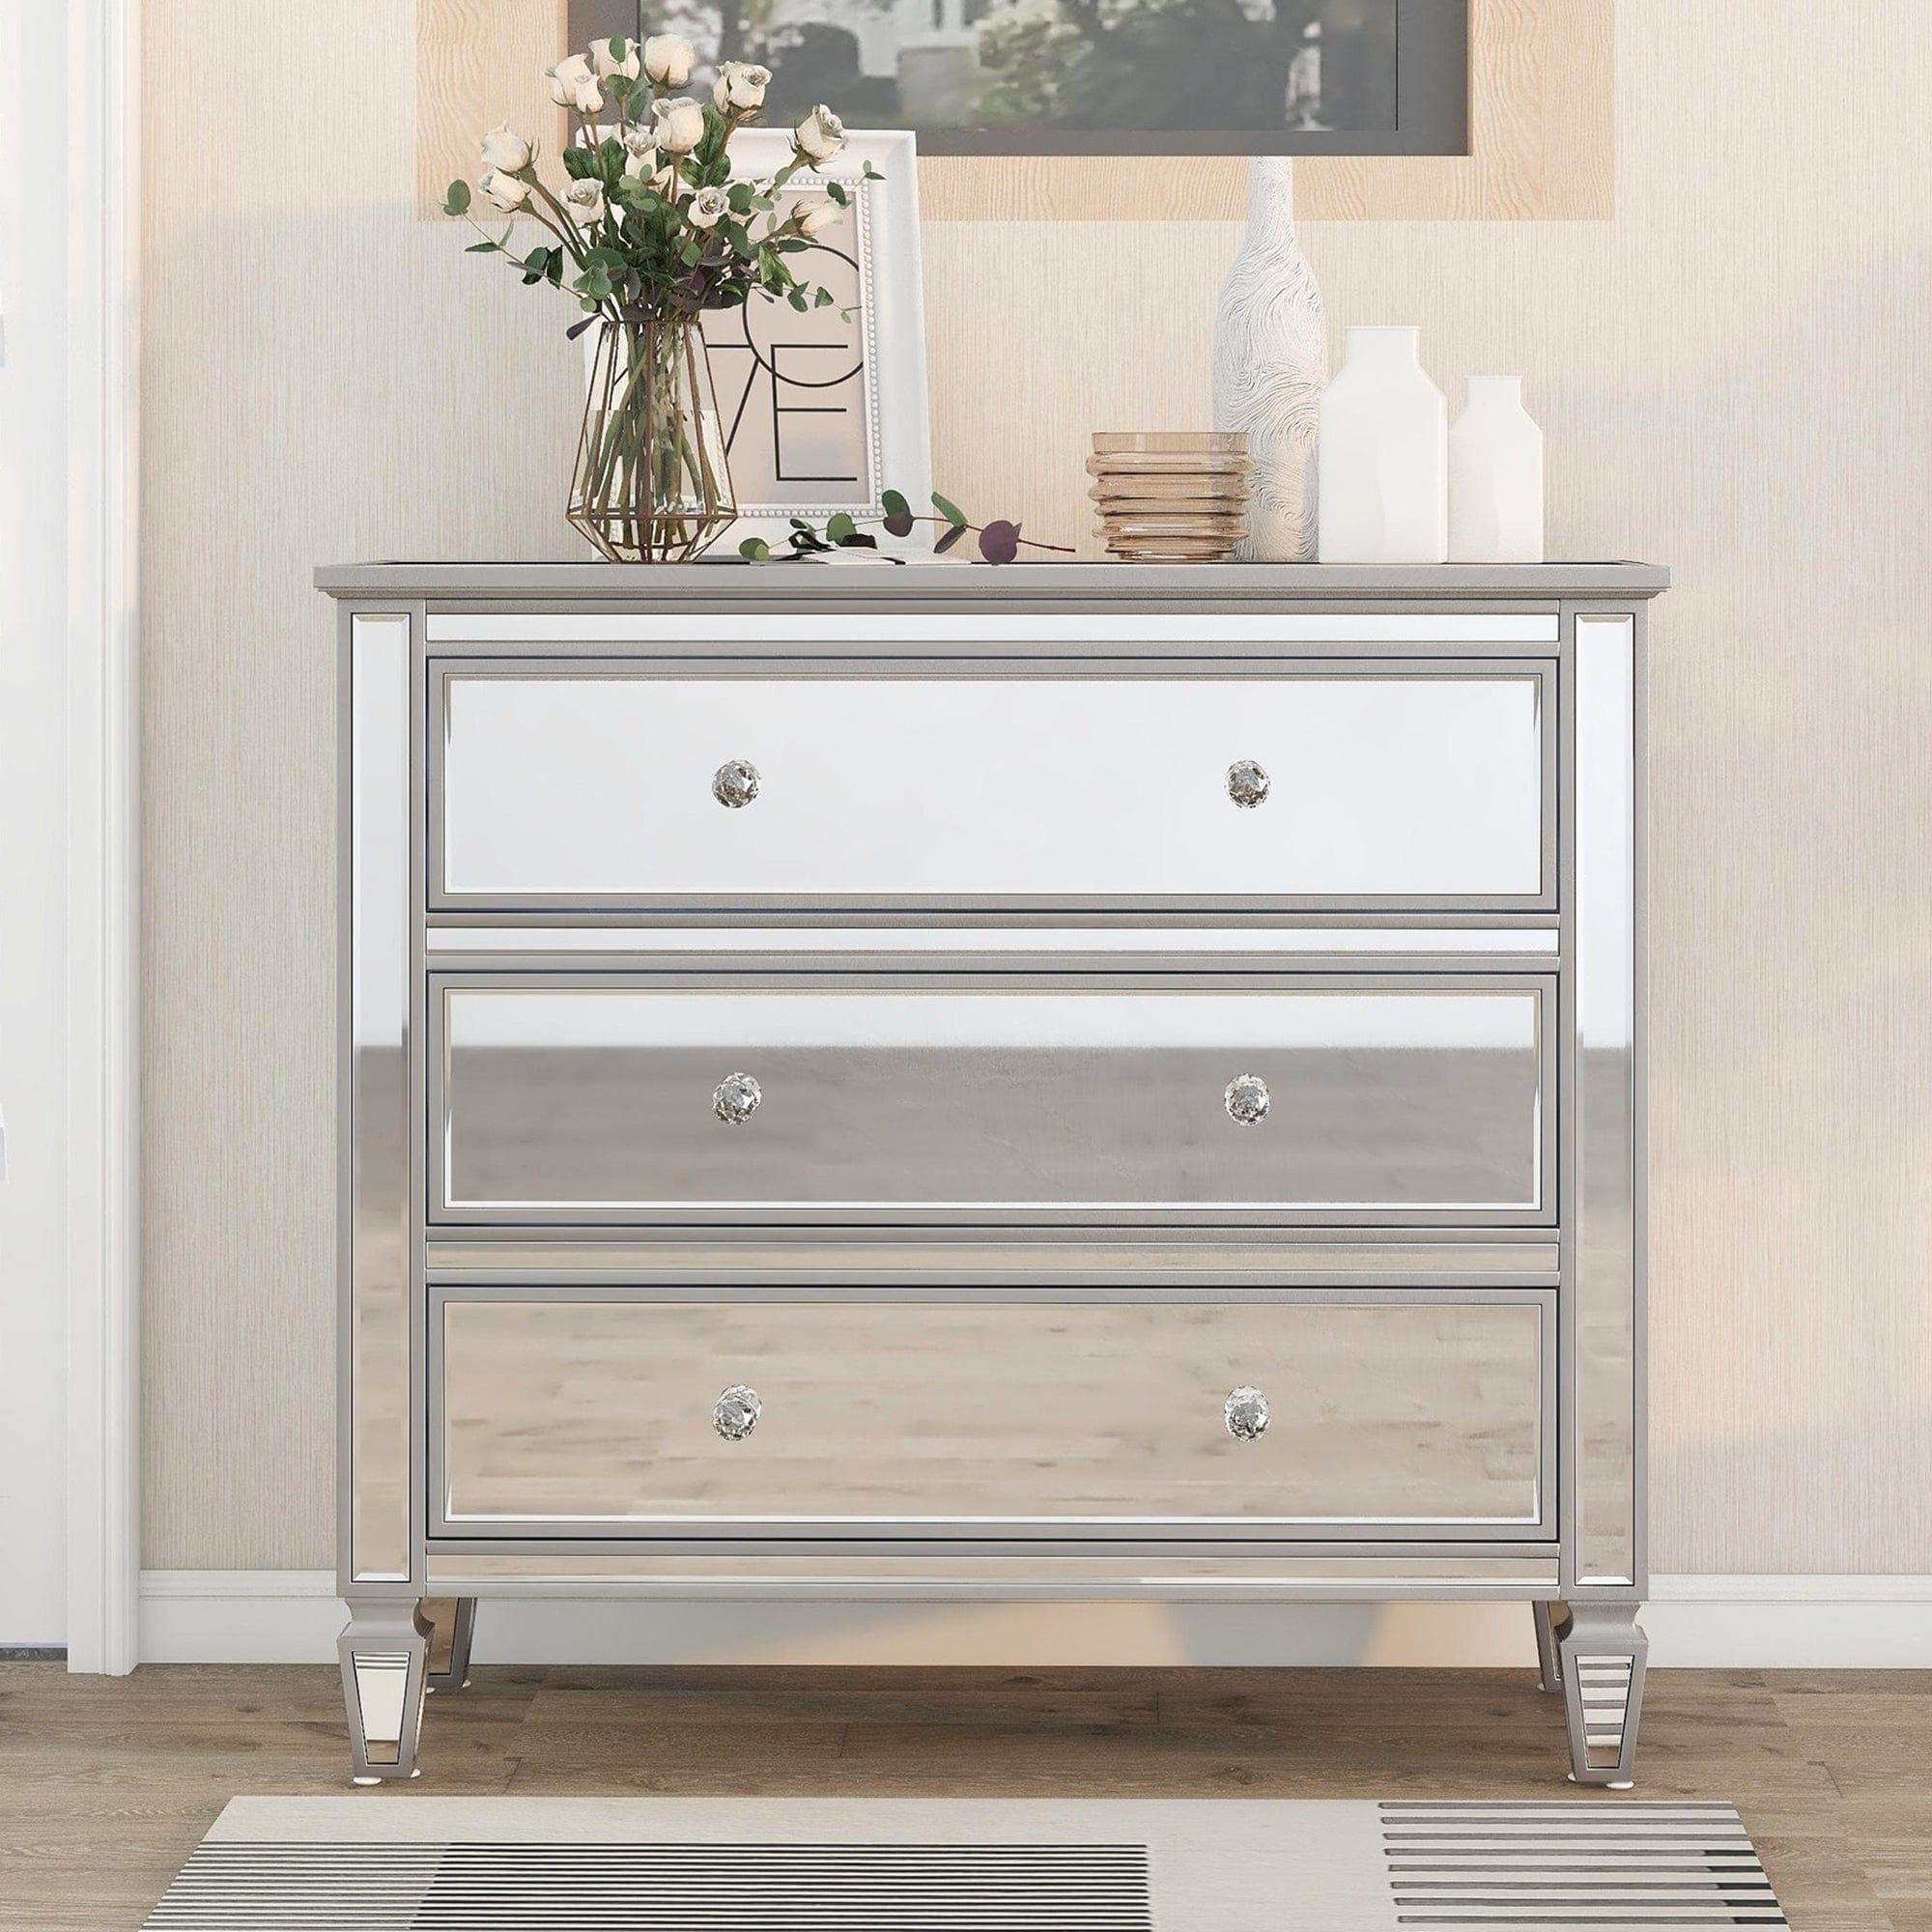 Shop Elegant Mirrored Chest with 3 Drawers, Modern Silver Finished Chest for Living Room Bedroom Mademoiselle Home Decor